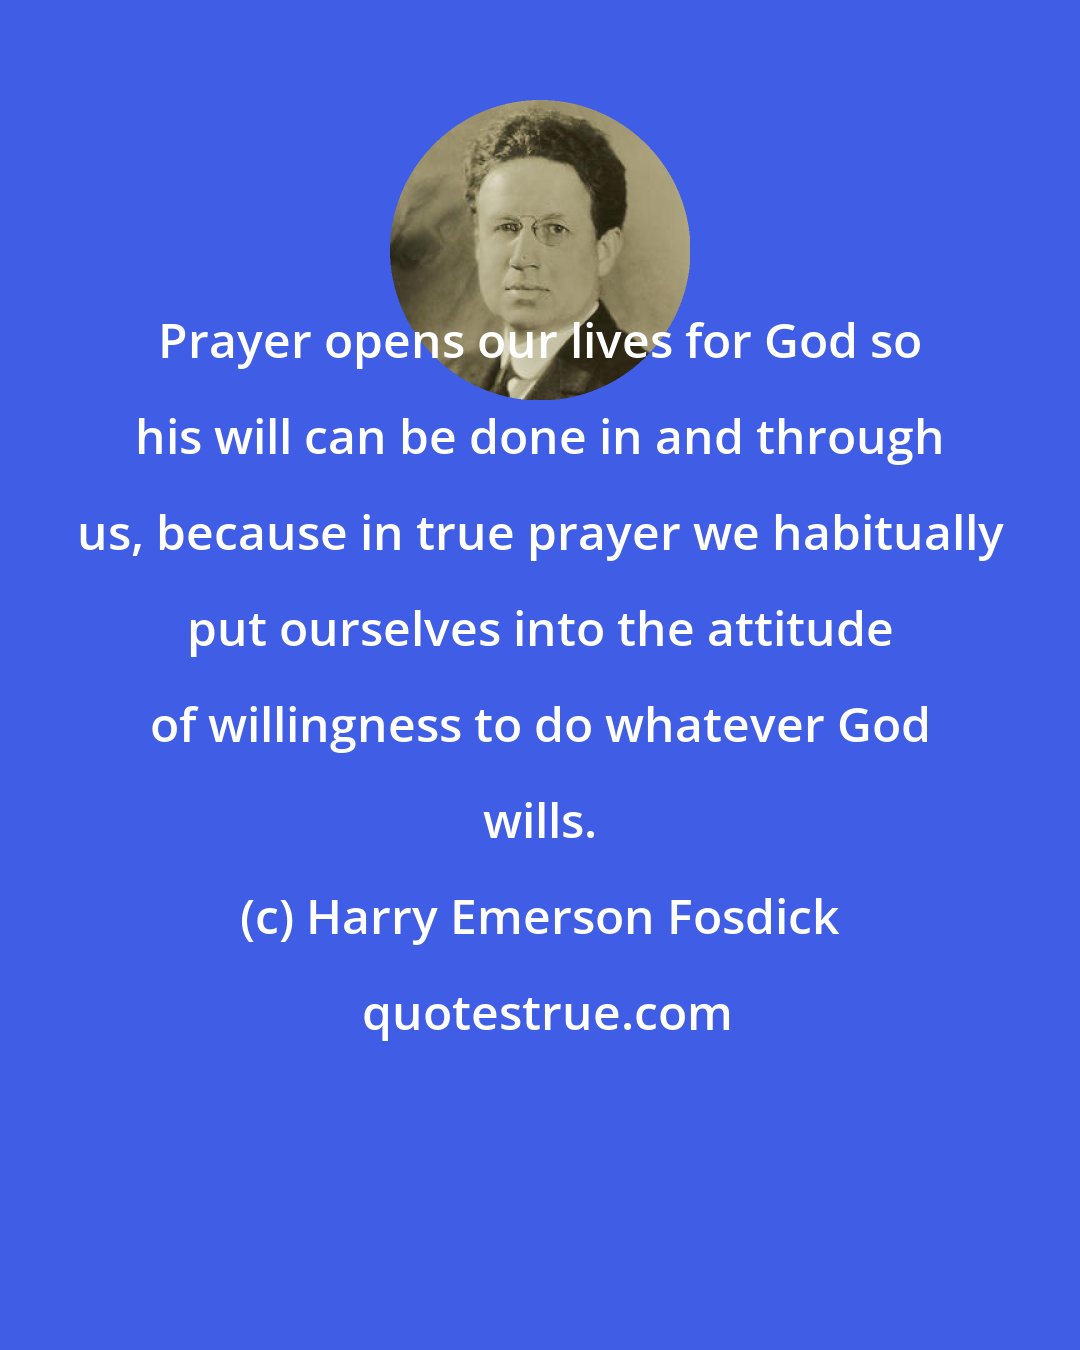 Harry Emerson Fosdick: Prayer opens our lives for God so his will can be done in and through us, because in true prayer we habitually put ourselves into the attitude of willingness to do whatever God wills.